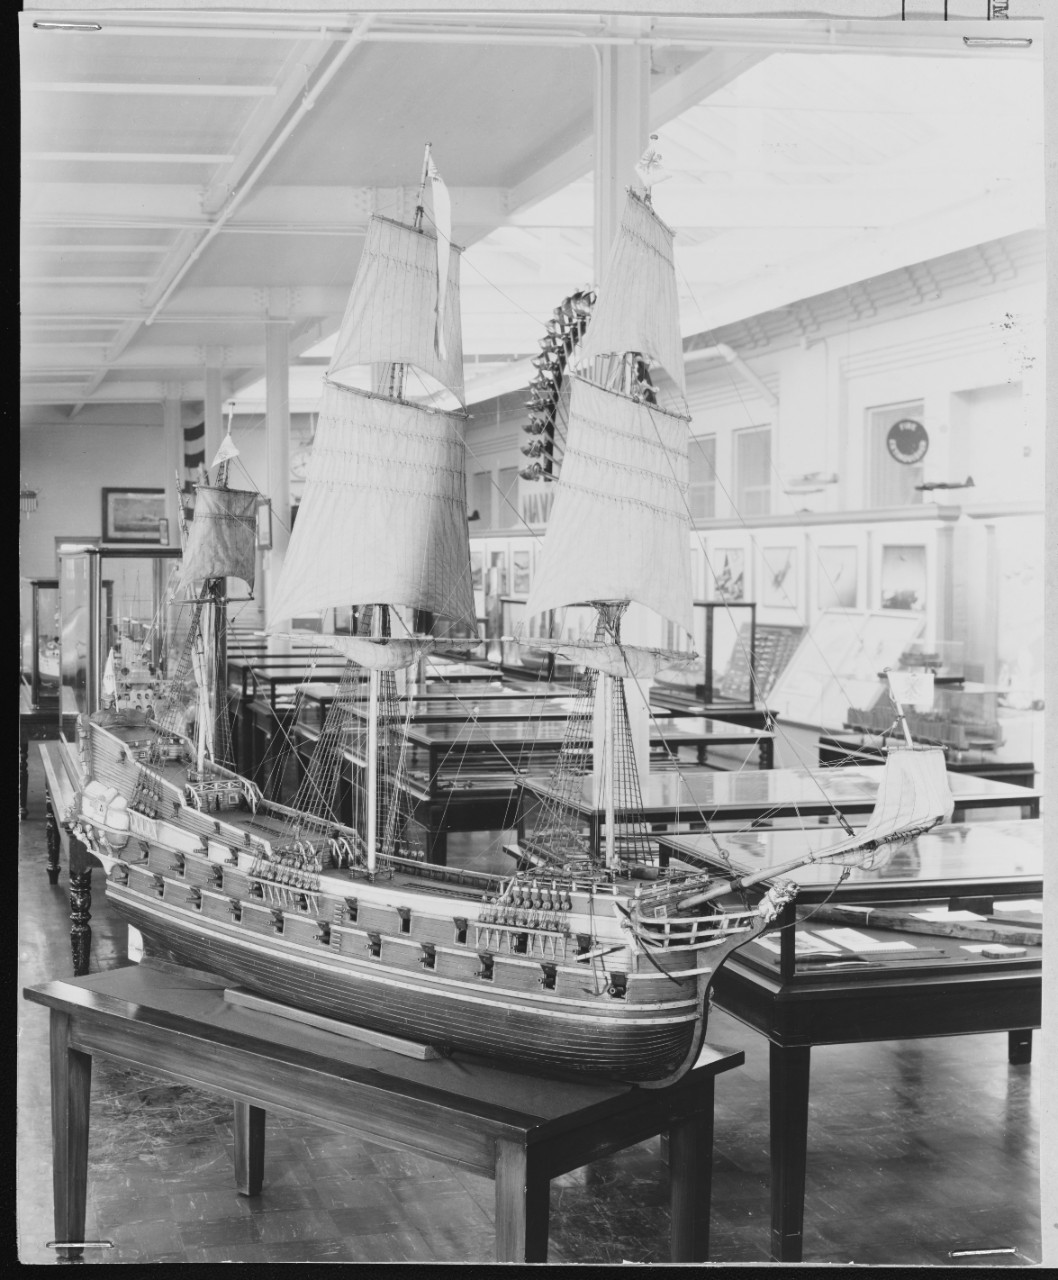 Warship of about 54 guns, circa early 18th century